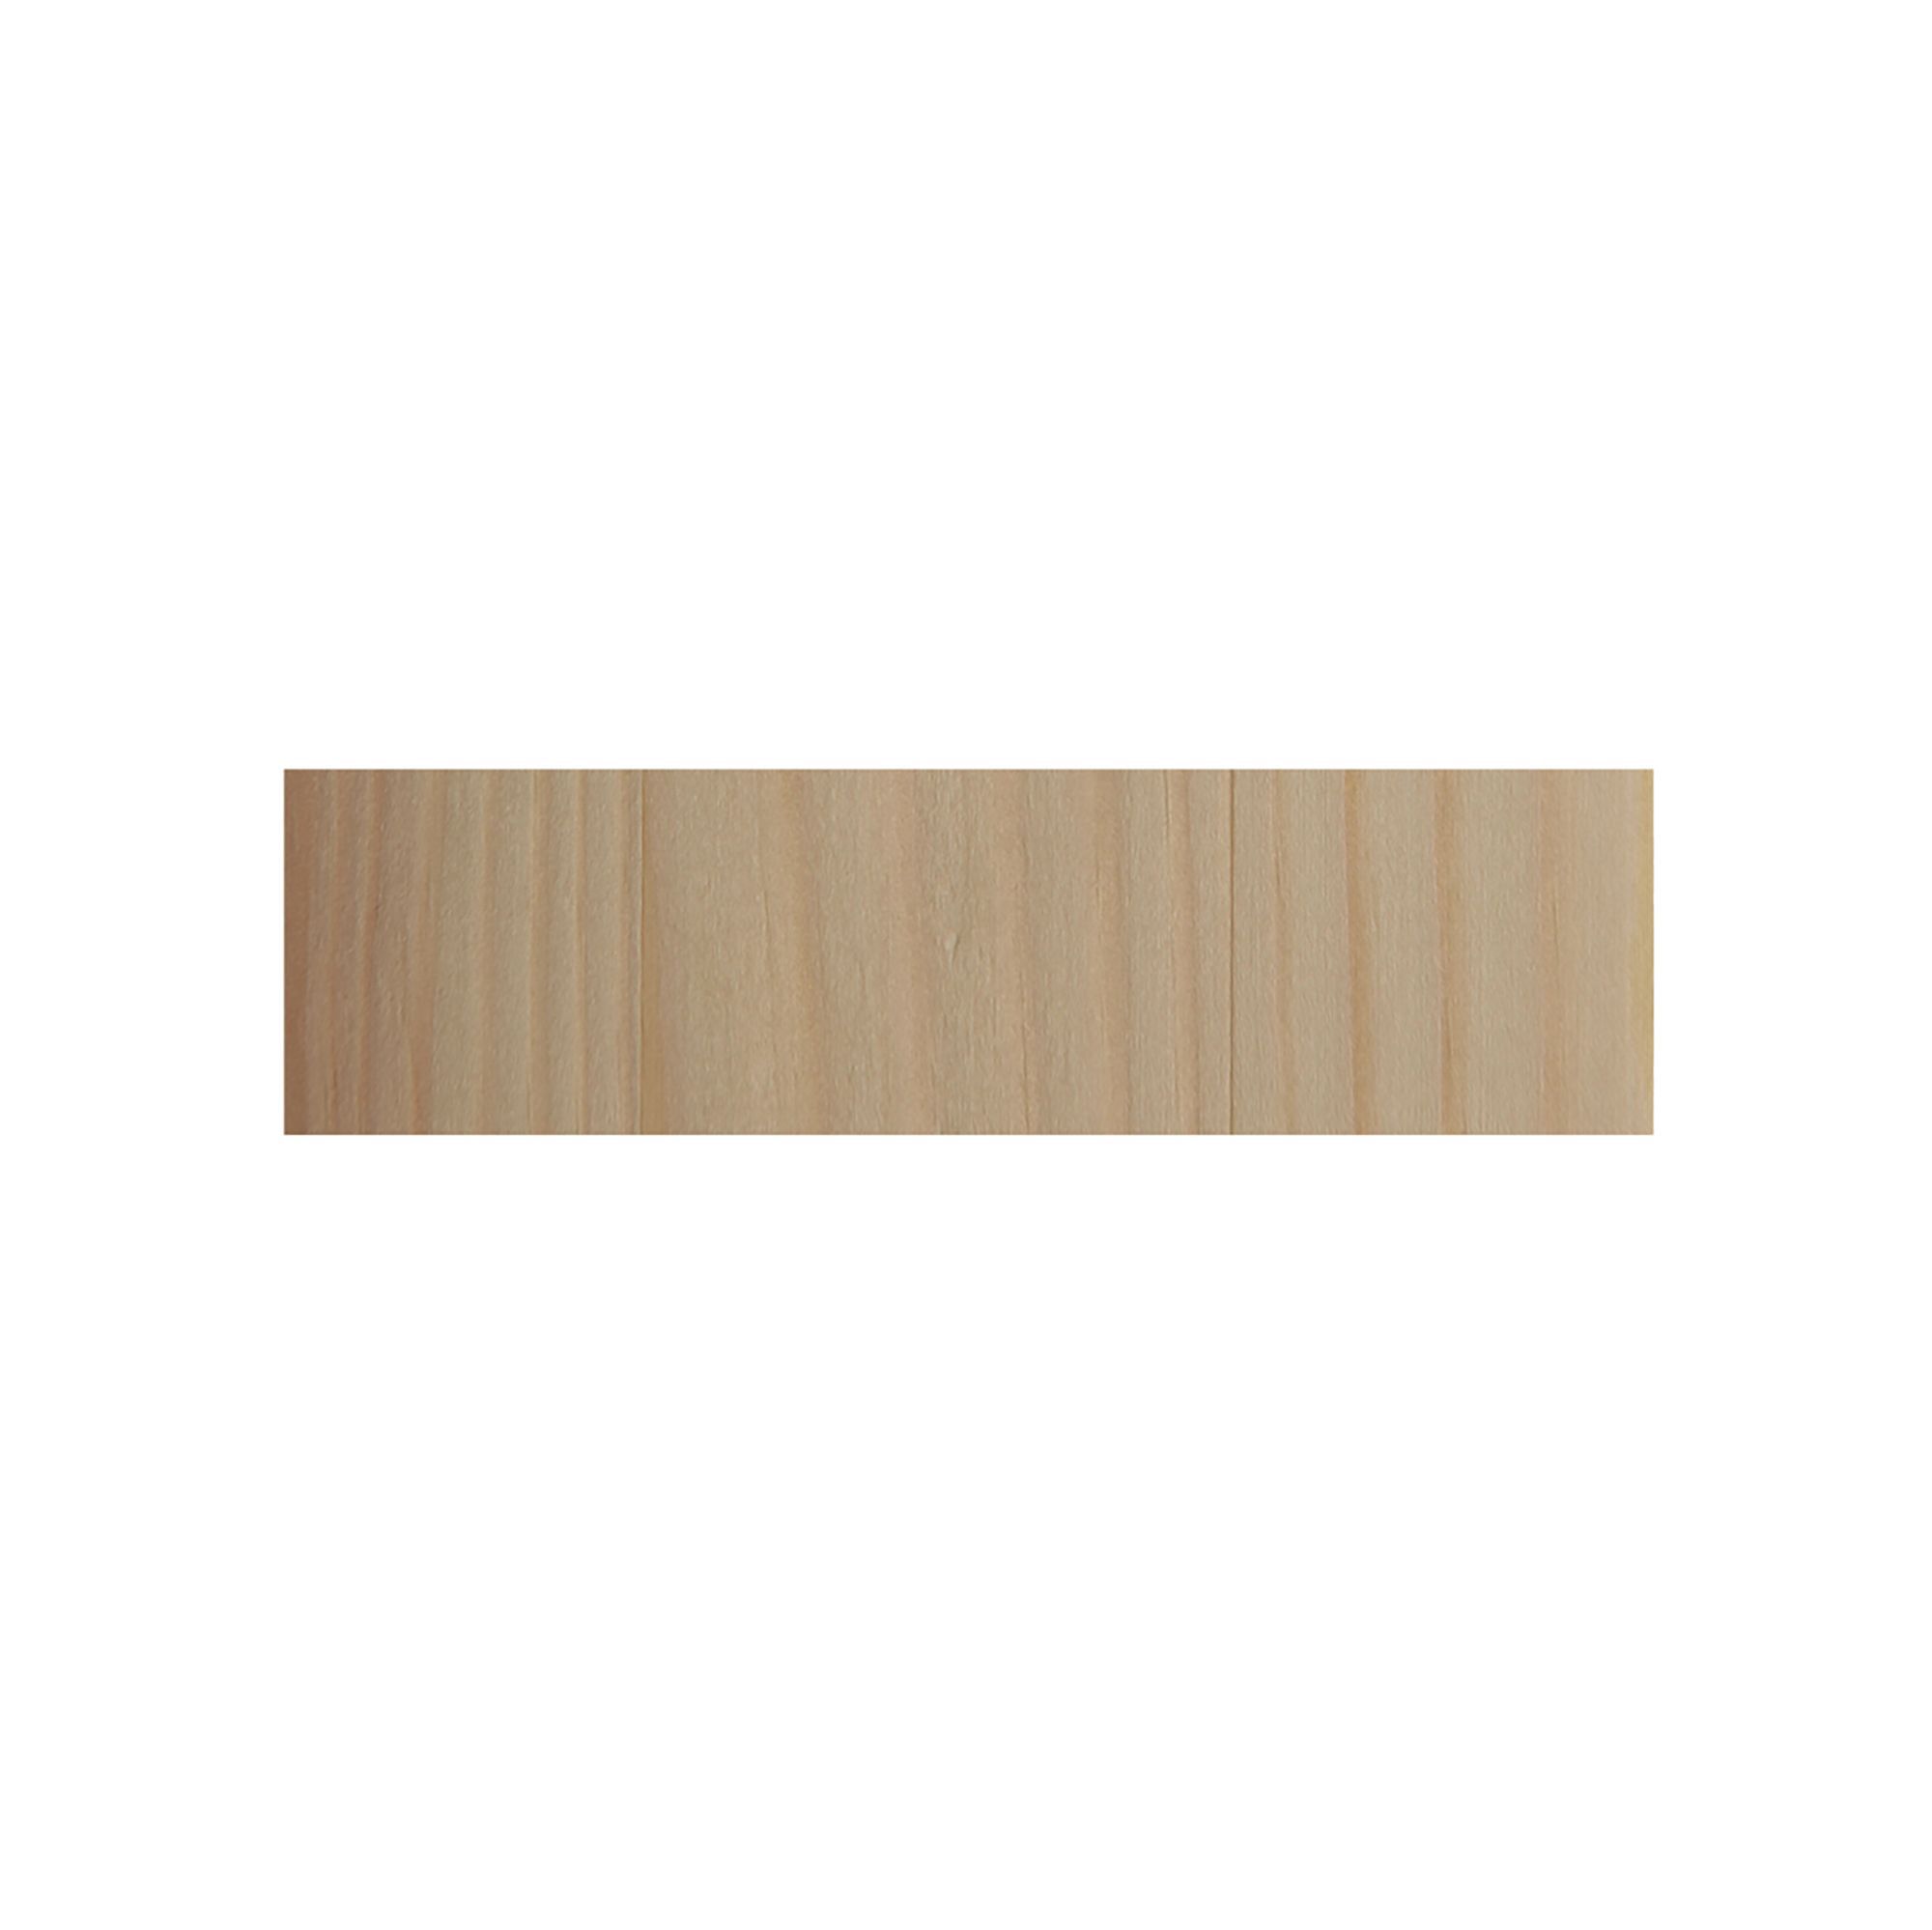 Cheshire Mouldings Smooth Planed Square edge Pine Stripwood (L)0.9m (W)46mm (T)10.5mm STPN46